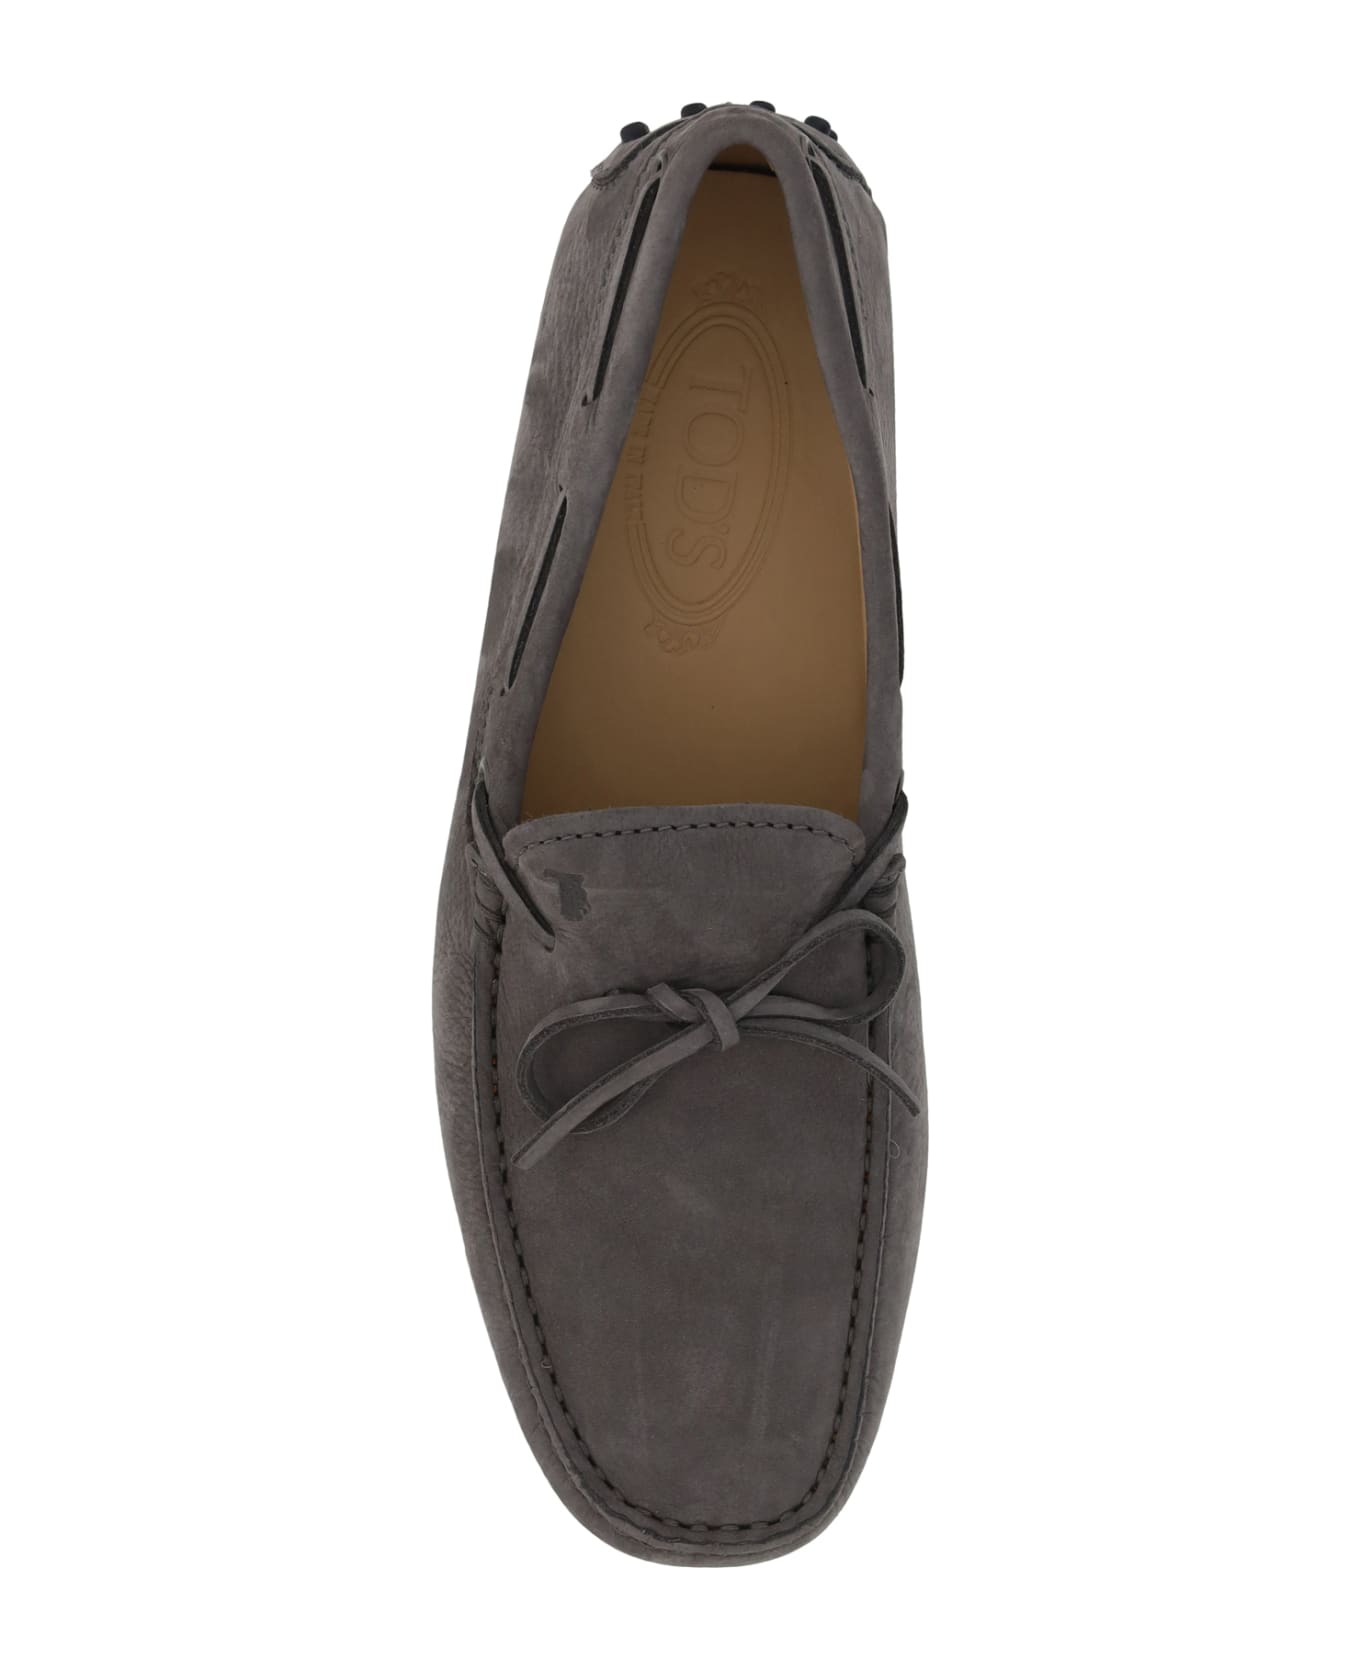 Tod's Gommino Loafers - Grigio